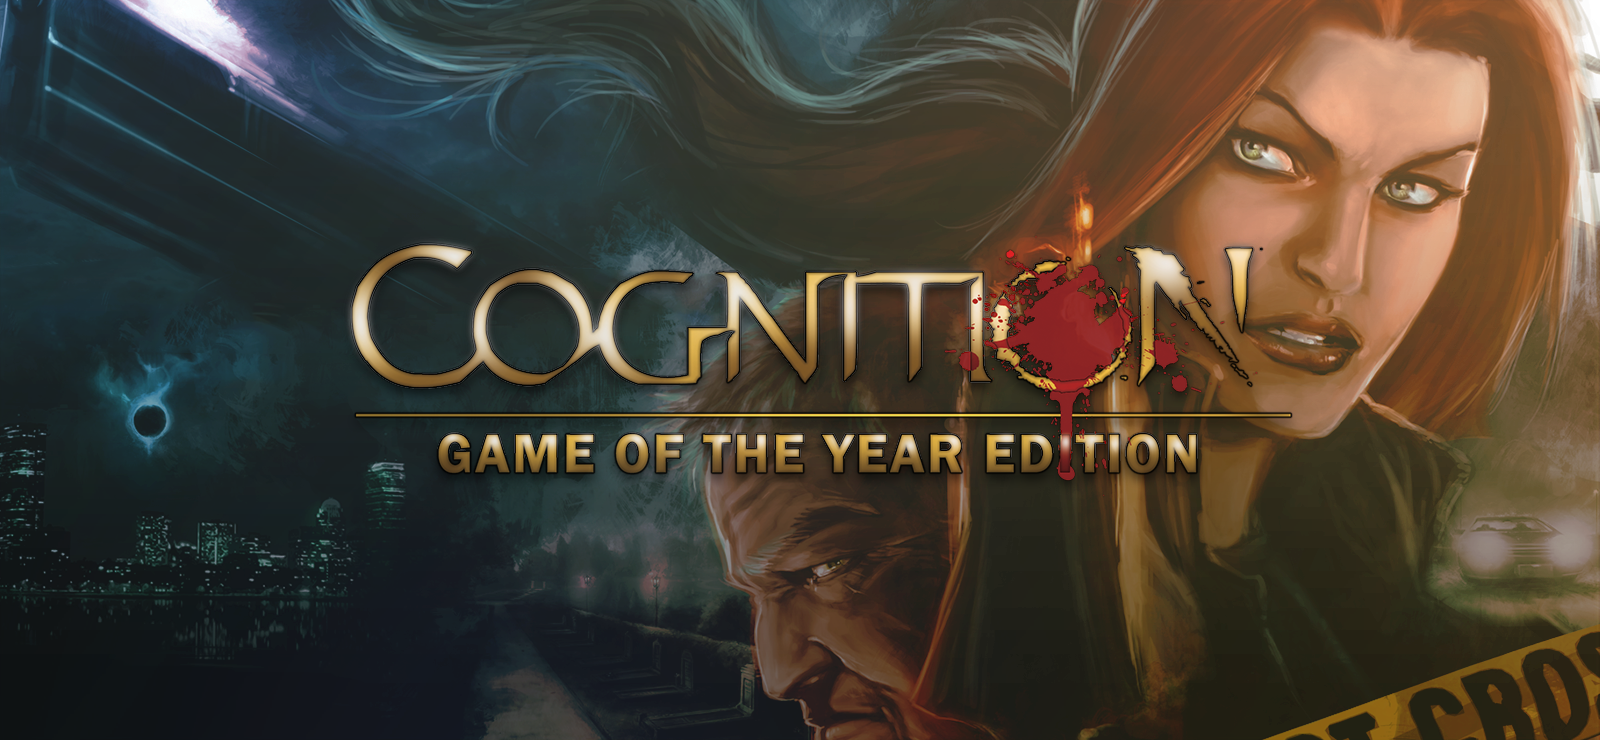 Cognition: Game Of The Year Edition